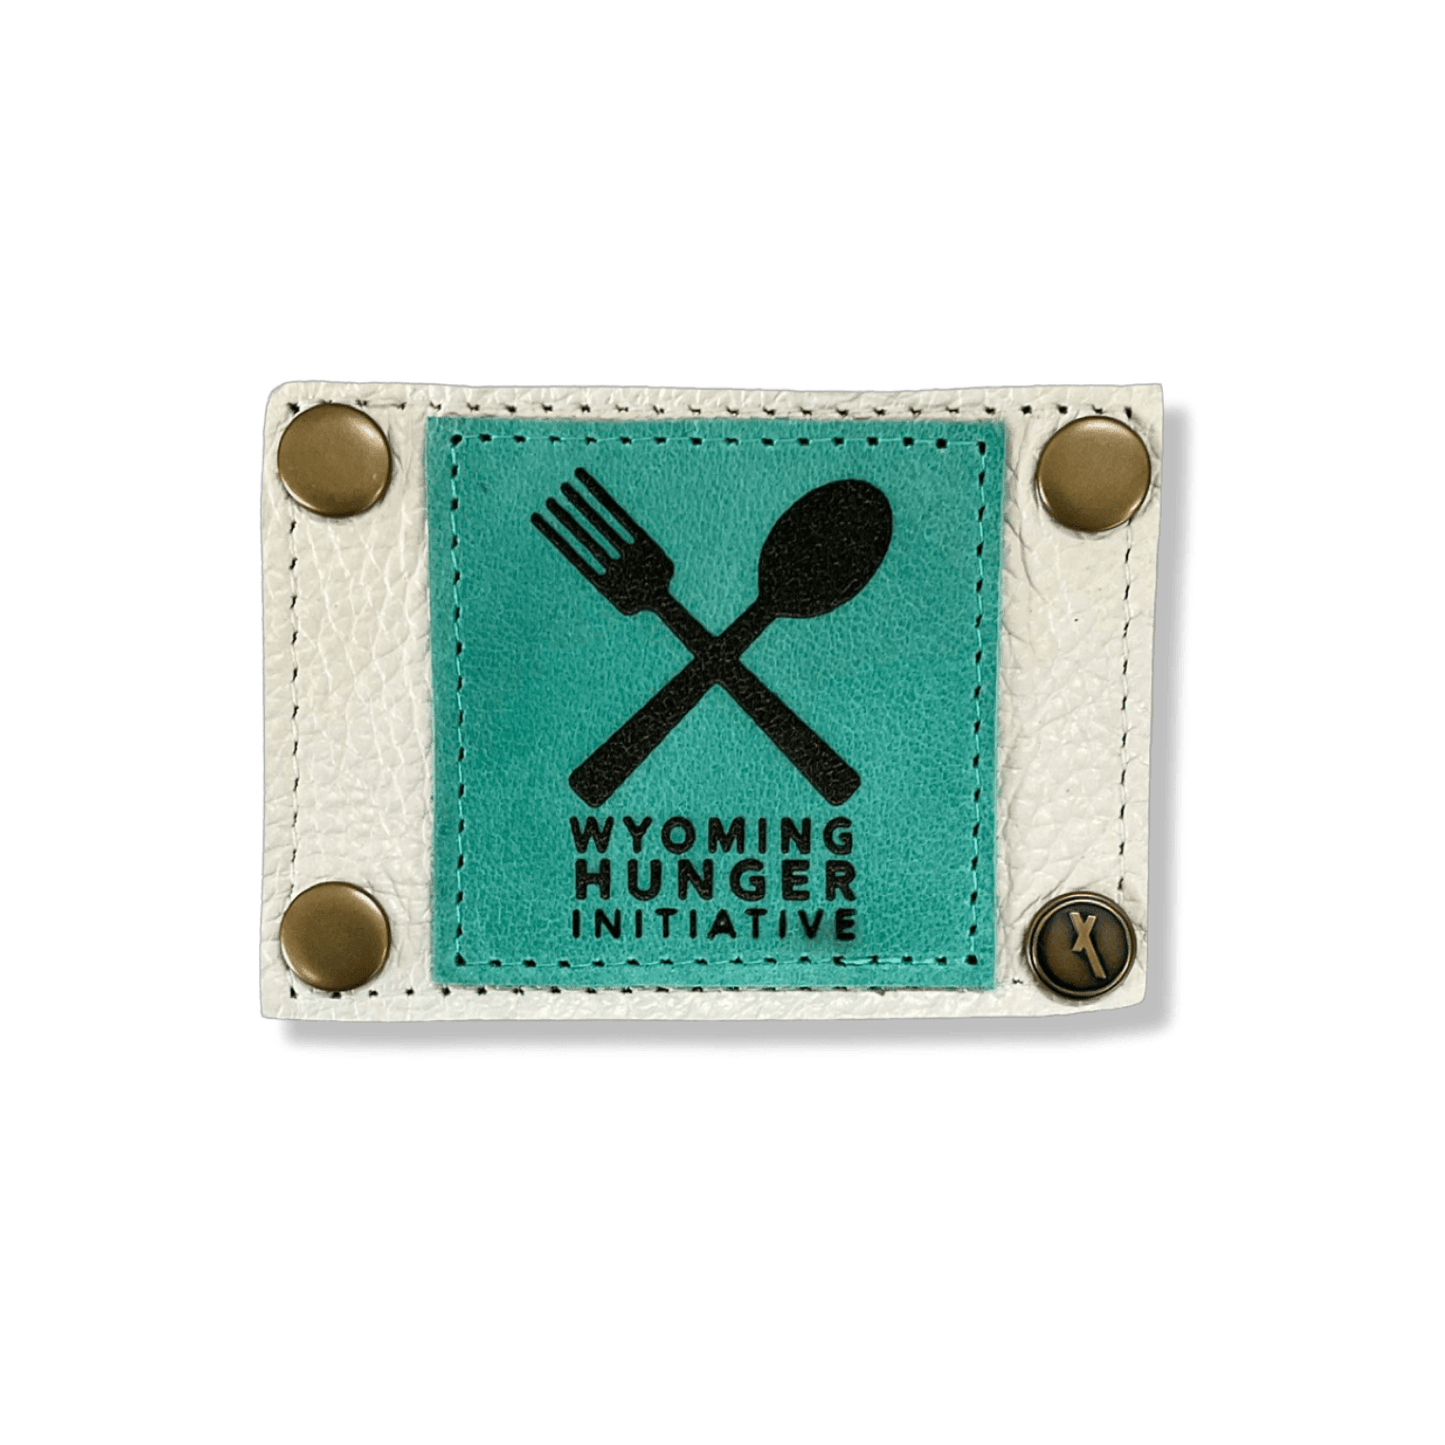 Wyoming Hunger Initiative Patch